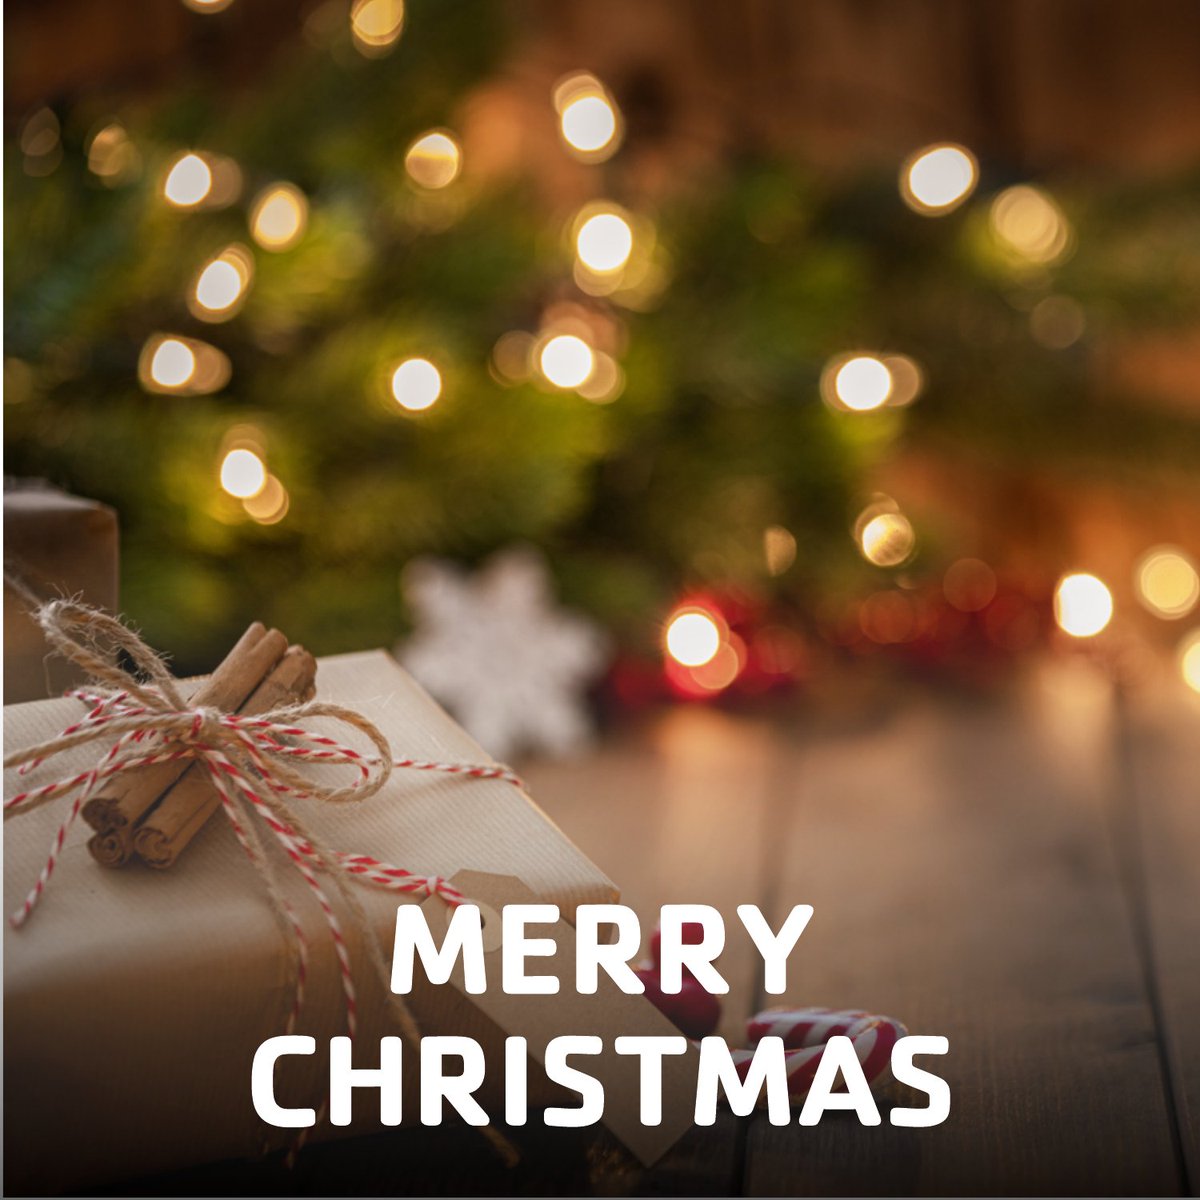 Wishing you a Merry Christmas from all of us at the Y! May your day be filled with joy, laughter and the warmth of the holiday spirit. Here's to celebrating the season with love, togetherness and the magic of Christmas! #MerryChristmas #Christmas #Holiday #Celebrate #FORALL